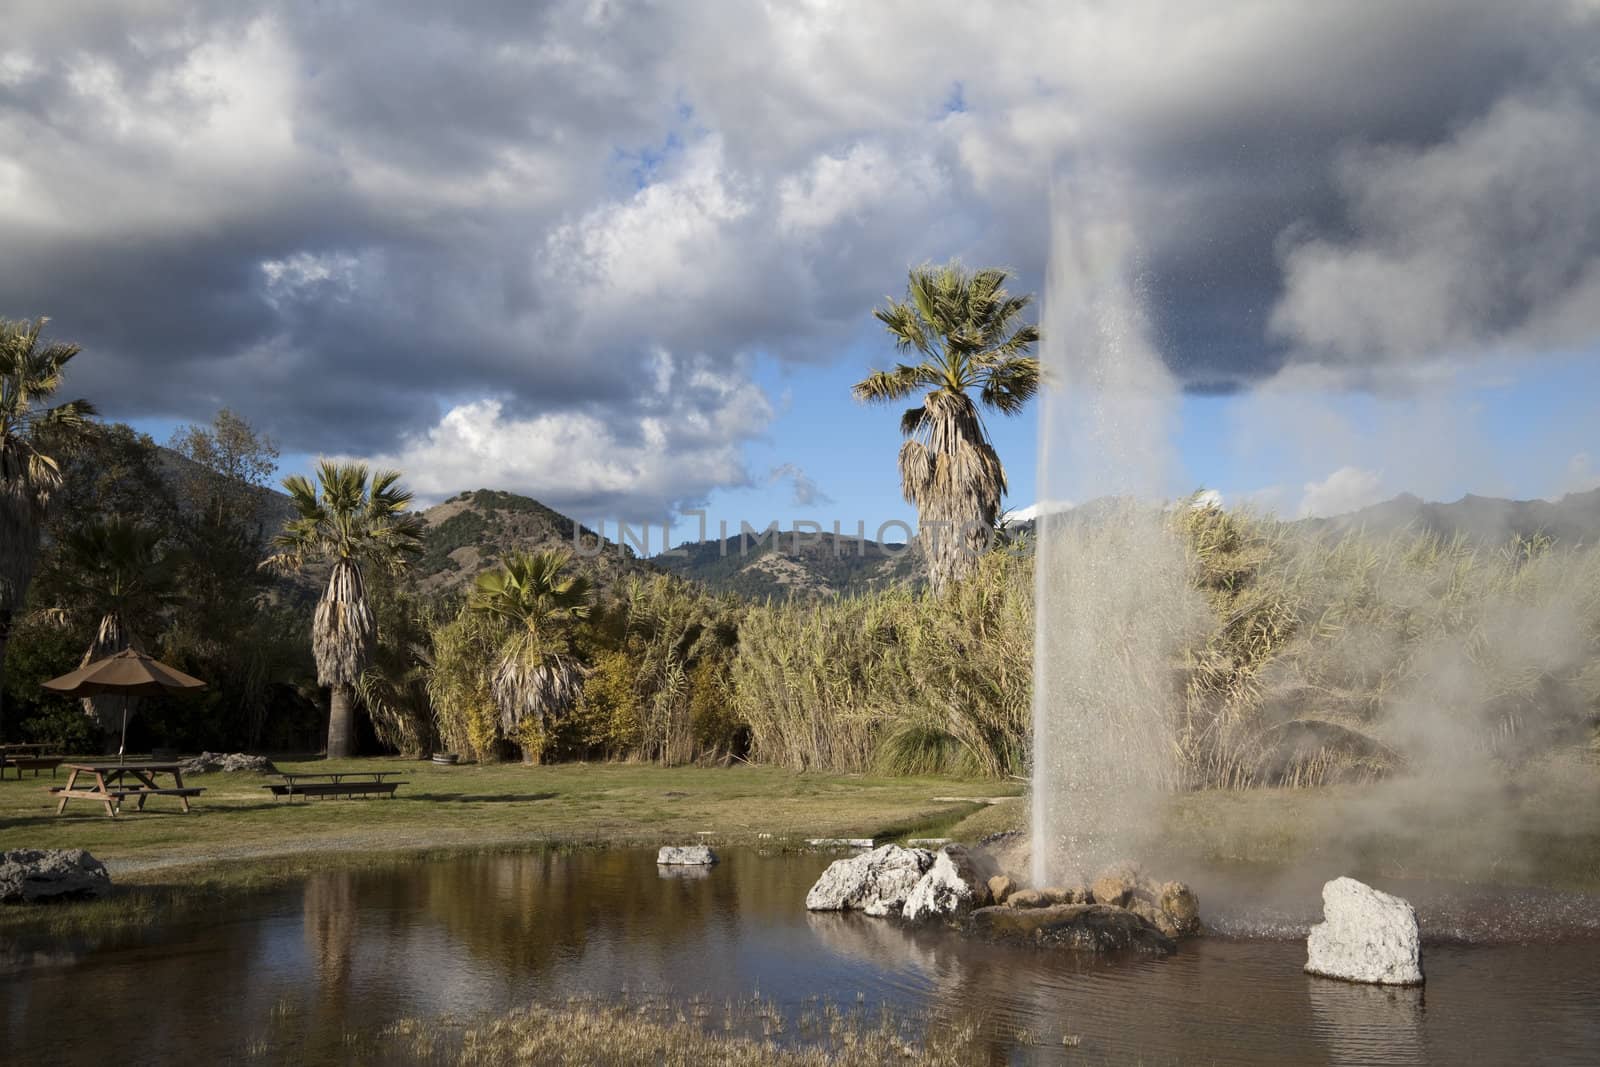 A natural geyser shooting water out of the ground and into the air